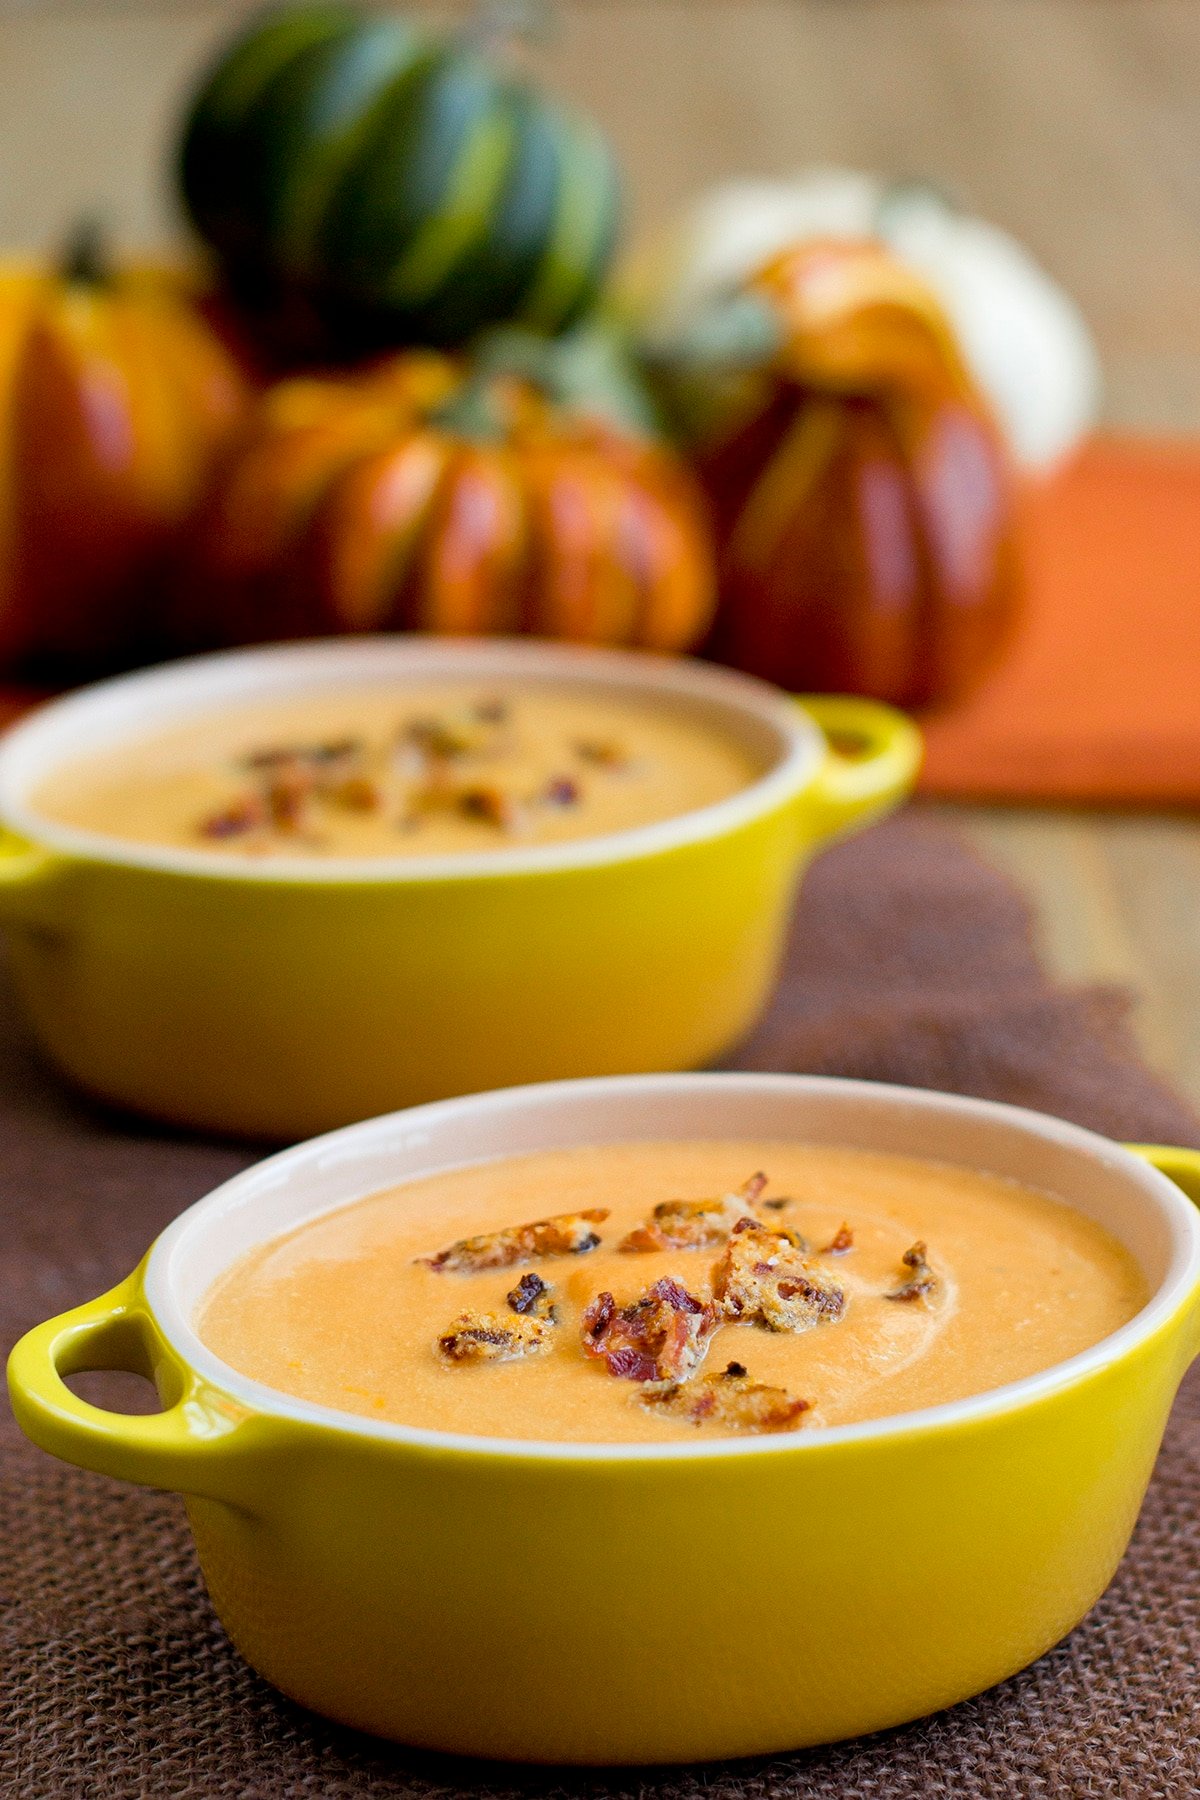 Pumpkin Soup With Bacon Crumbles